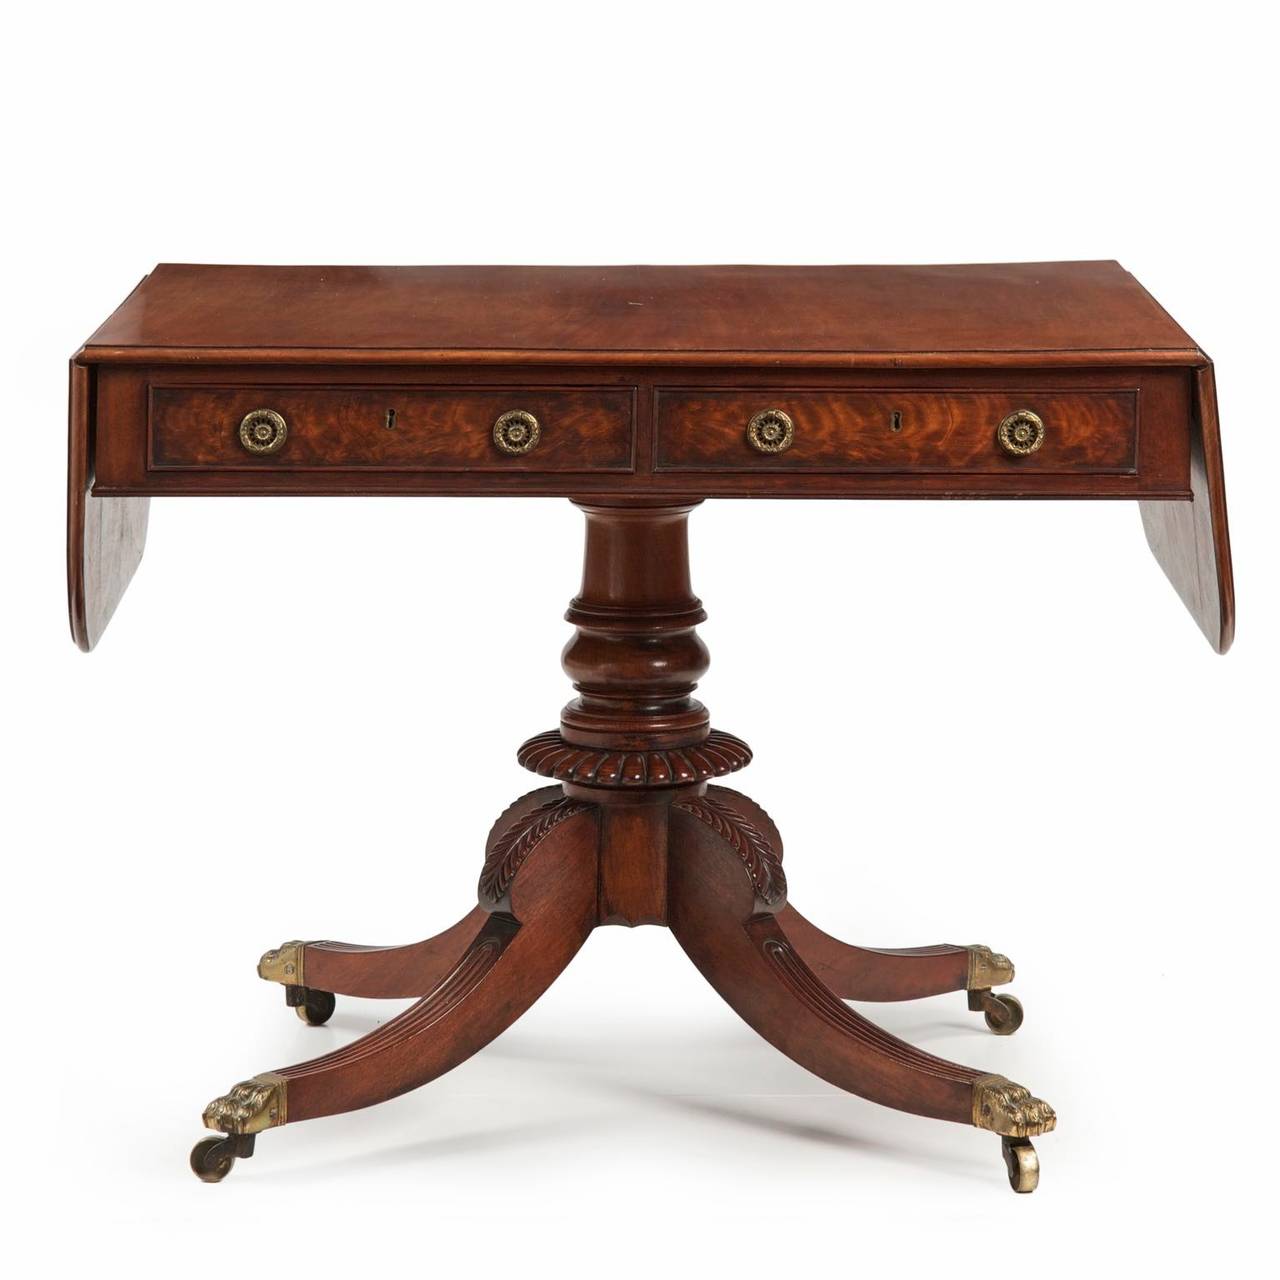 A finely crafted table of the Regency period, this sofa table features a vibrant solid mahogany top with molded edges of the solid, the outer leaves raising on original iron hinges over two knuckled wings to create a wide presentation space.  The